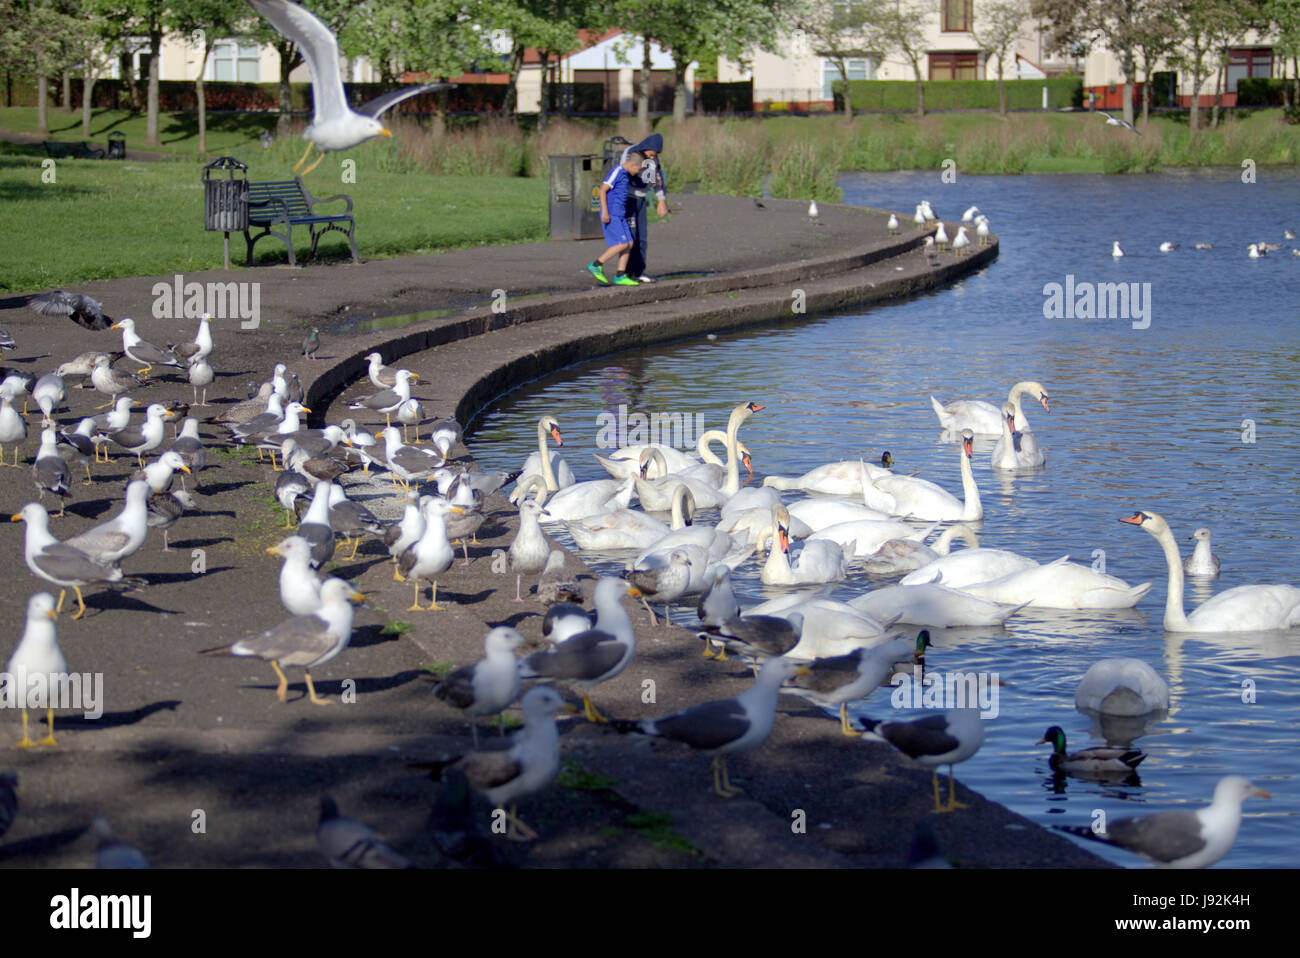 two multi racial ethnic boys playing by pond seagulls feeding in the park with swans in the pond lake Stock Photo